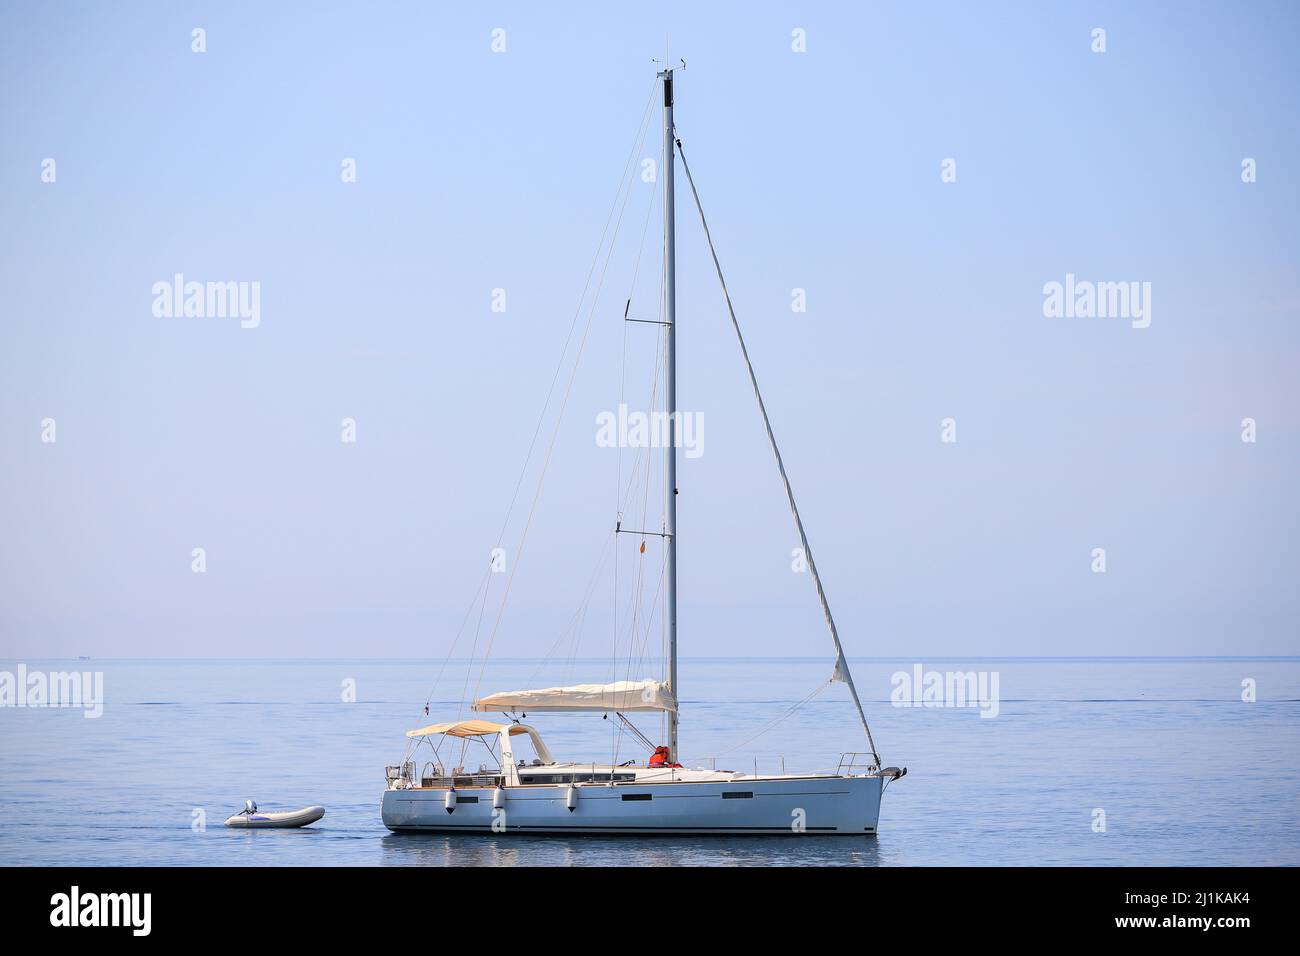 Sailing boat on the sea at calm in Montenegro Stock Photo